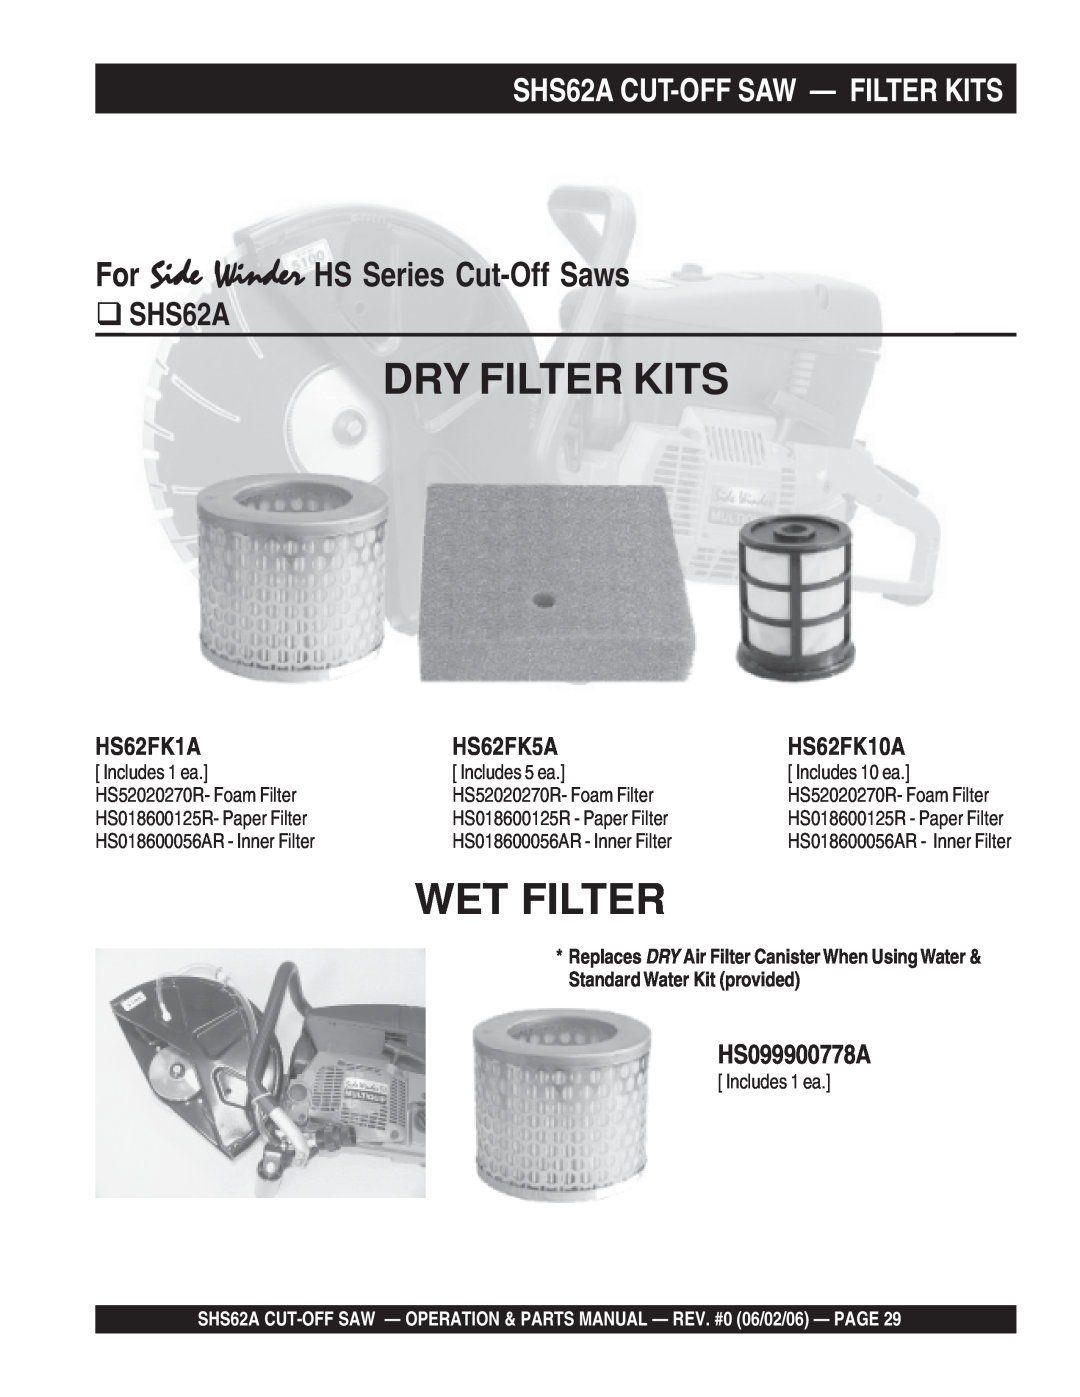 Stow SHS62A CUT-OFF SAW - FILTER KITS, Dry Filter Kits, Wet Filter, For Side Winder HS Series Cut-Off Saws, HS62FK1A 